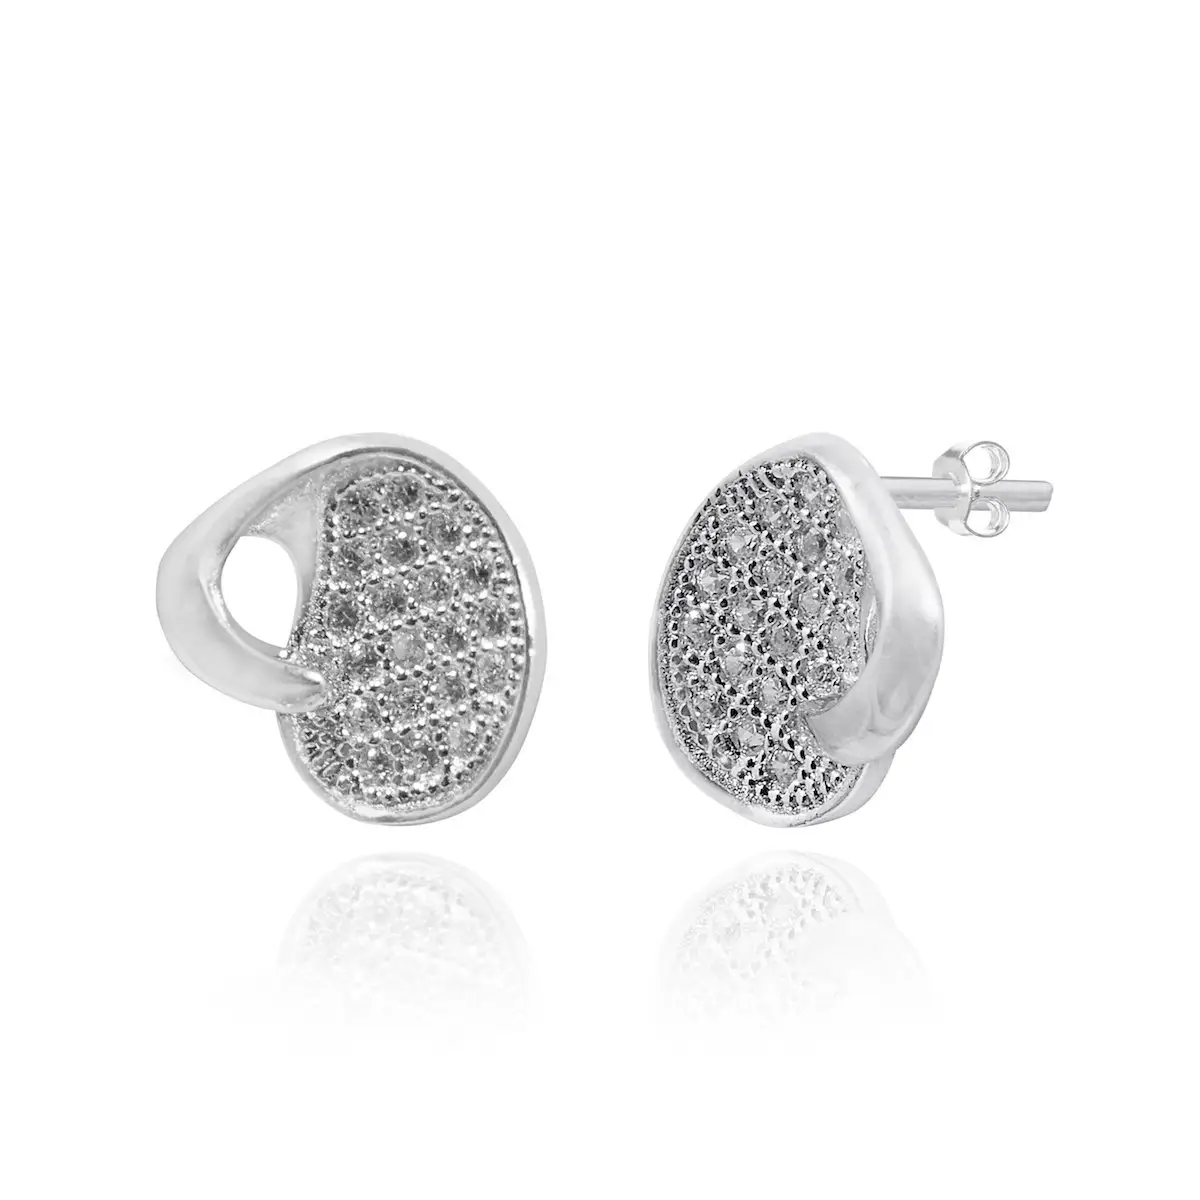 Avarta Jewellery 925 Sterling Silver Allure Unisex Stud Earring With Zircon For Women's Adorn Your Self with indian Cartmenship